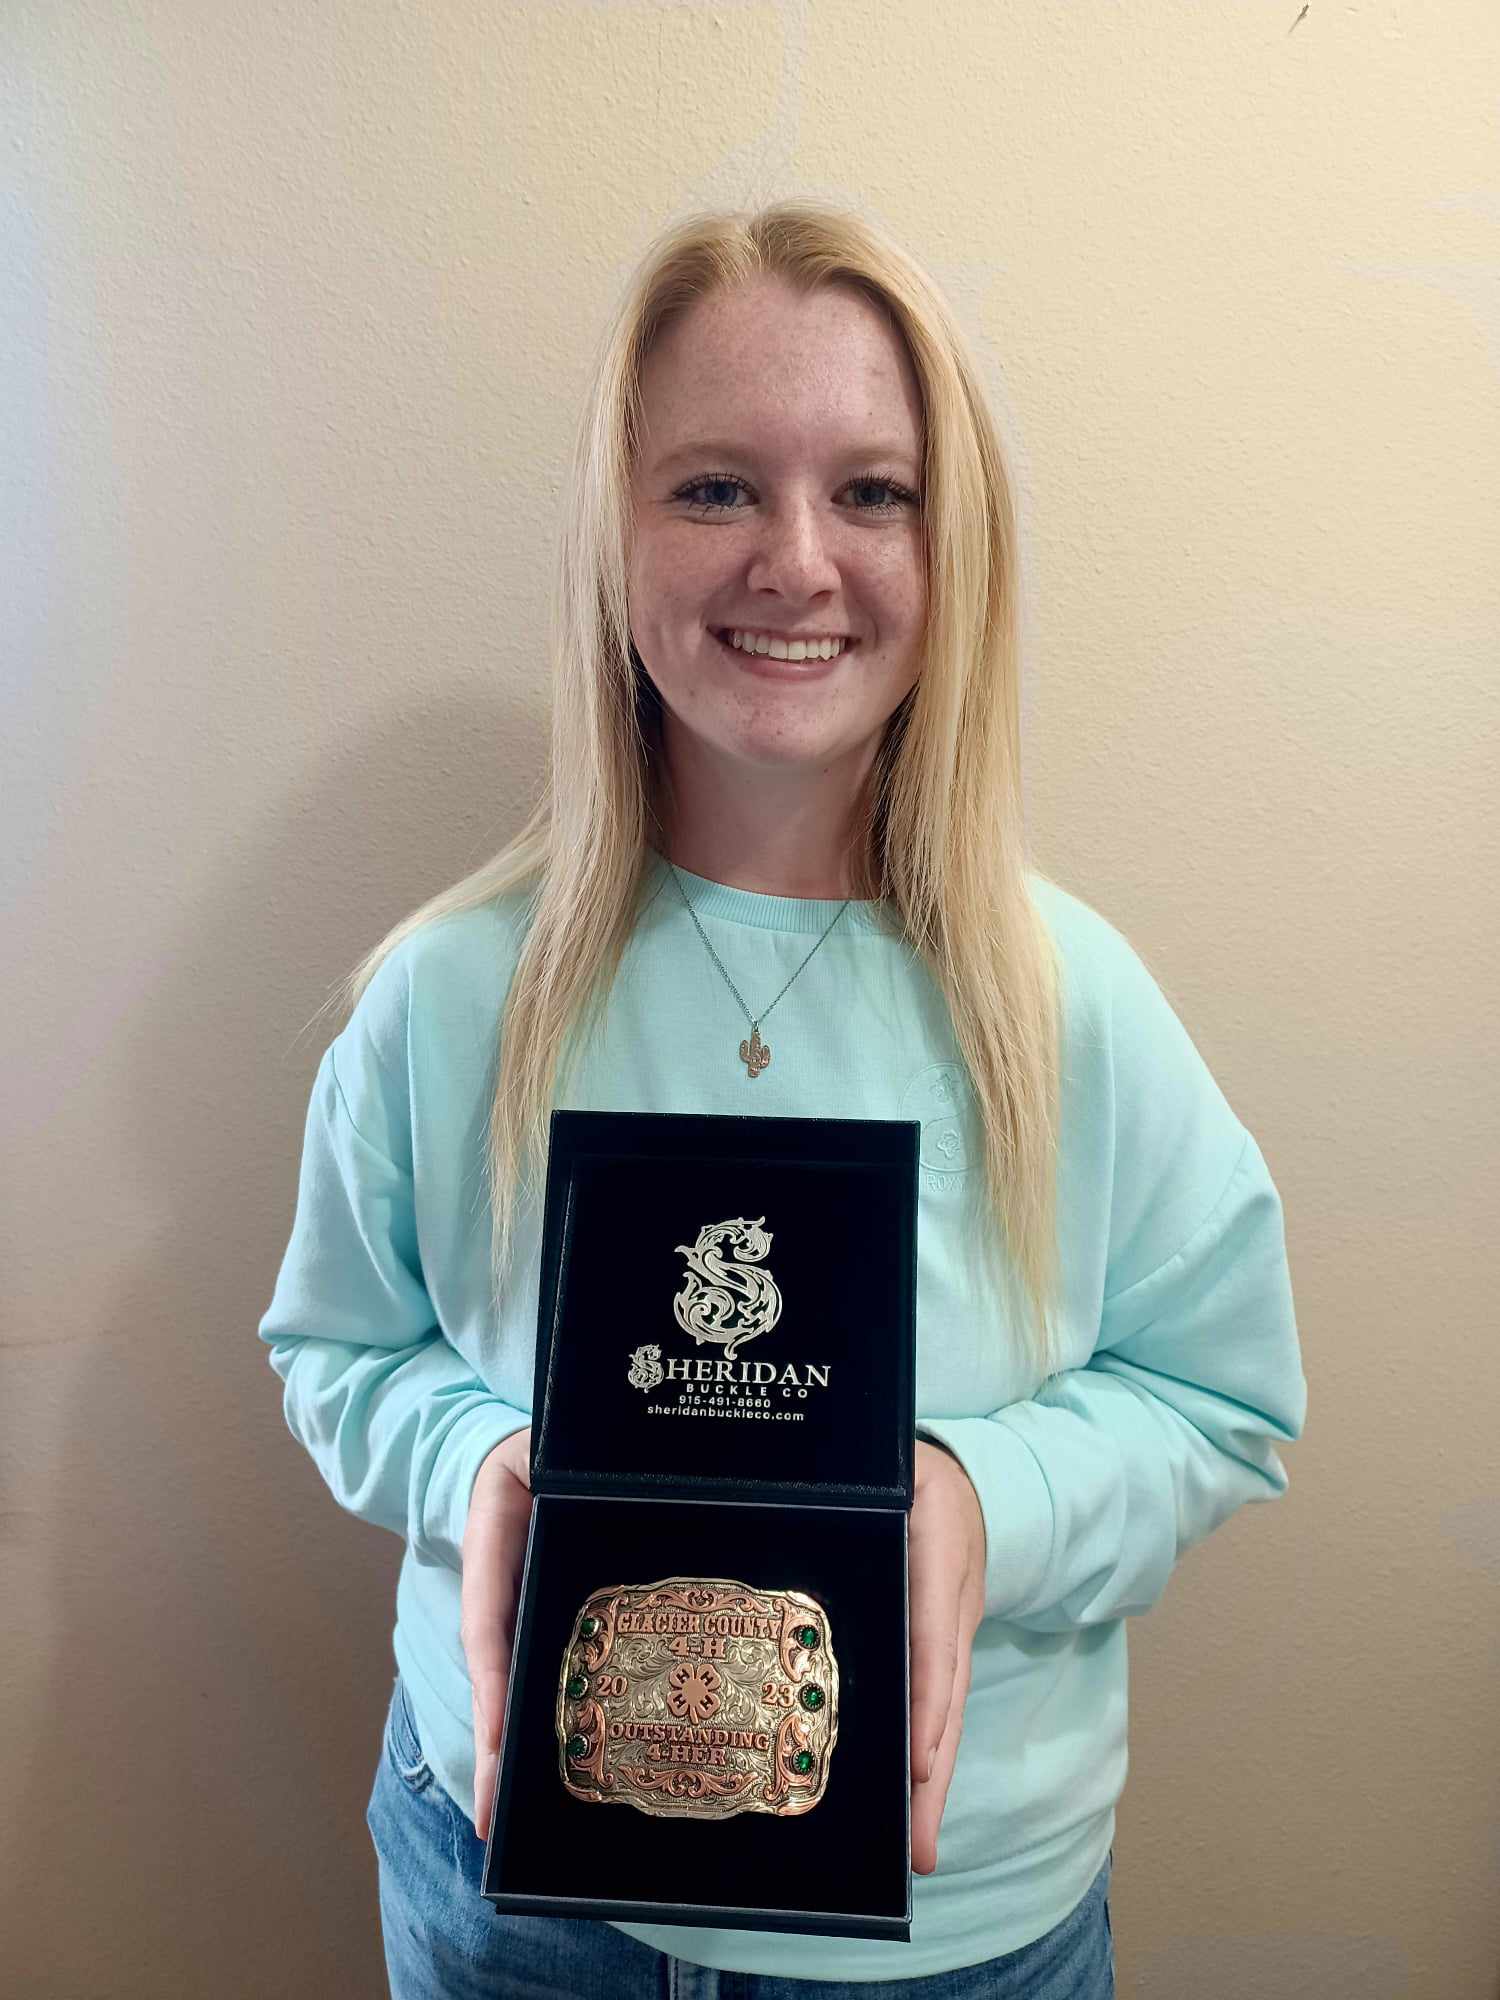 Addisyn Bengtson was named the Glacier County 4-H Outstanding Member for 22 – 23, receiving a custom belt buckle and having her name engraved on a plaque in the Extension Office.  